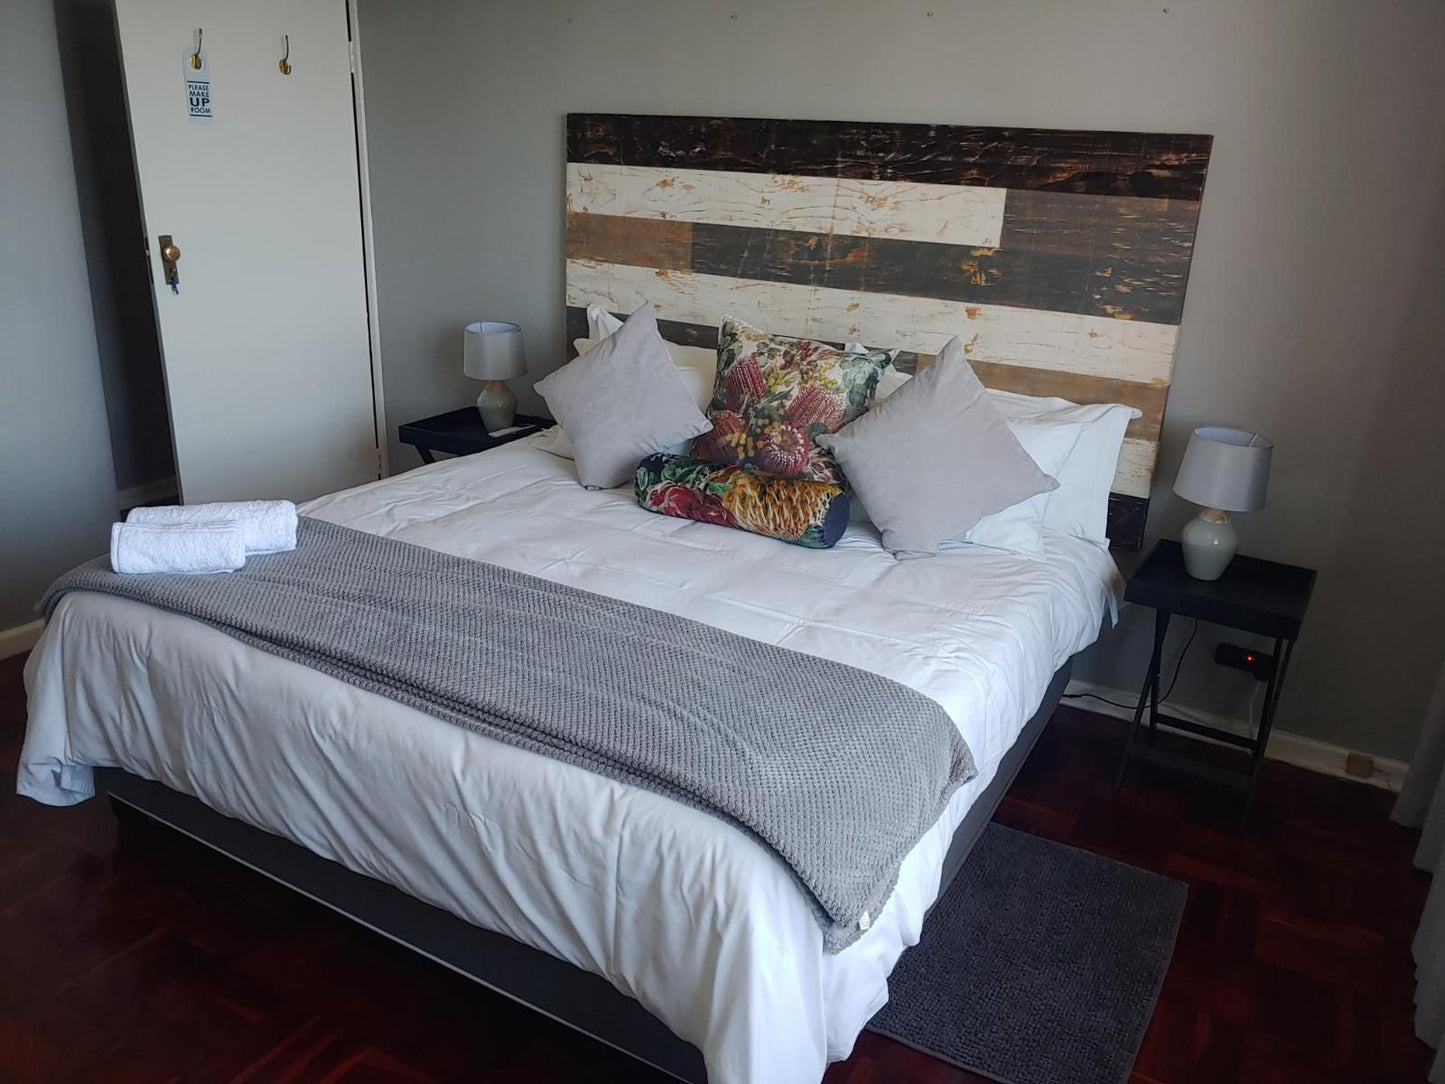 Boutique Hotel On The Bay Humewood Port Elizabeth Eastern Cape South Africa Bedroom